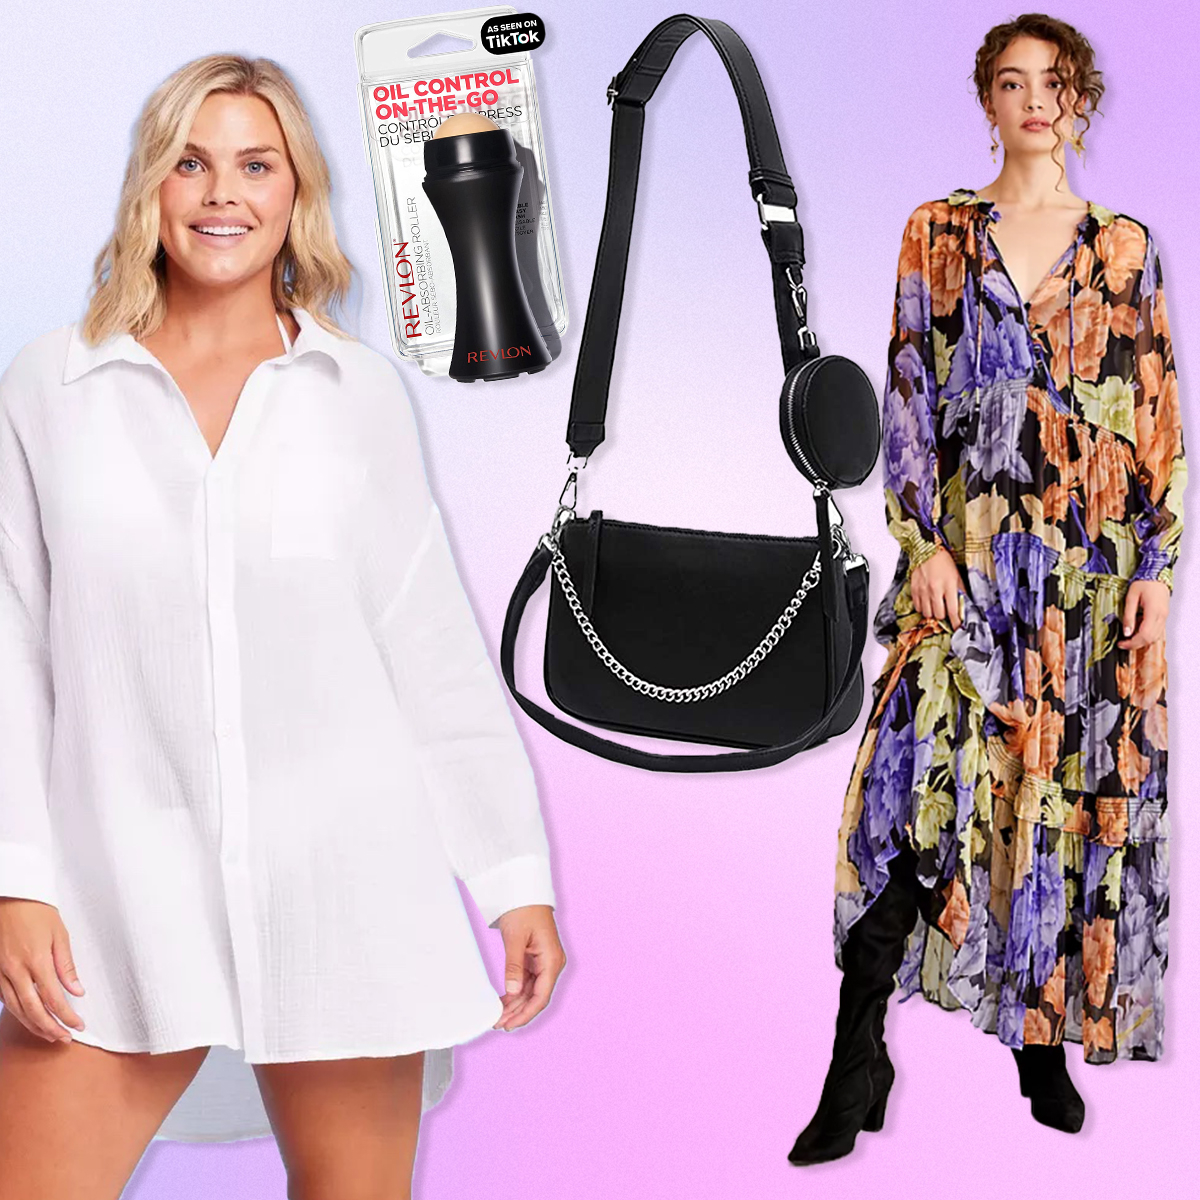 Spending Spring Break in Europe? Here’s Every Stylish Essential You Need to Pack for Your Getaway – E! Online